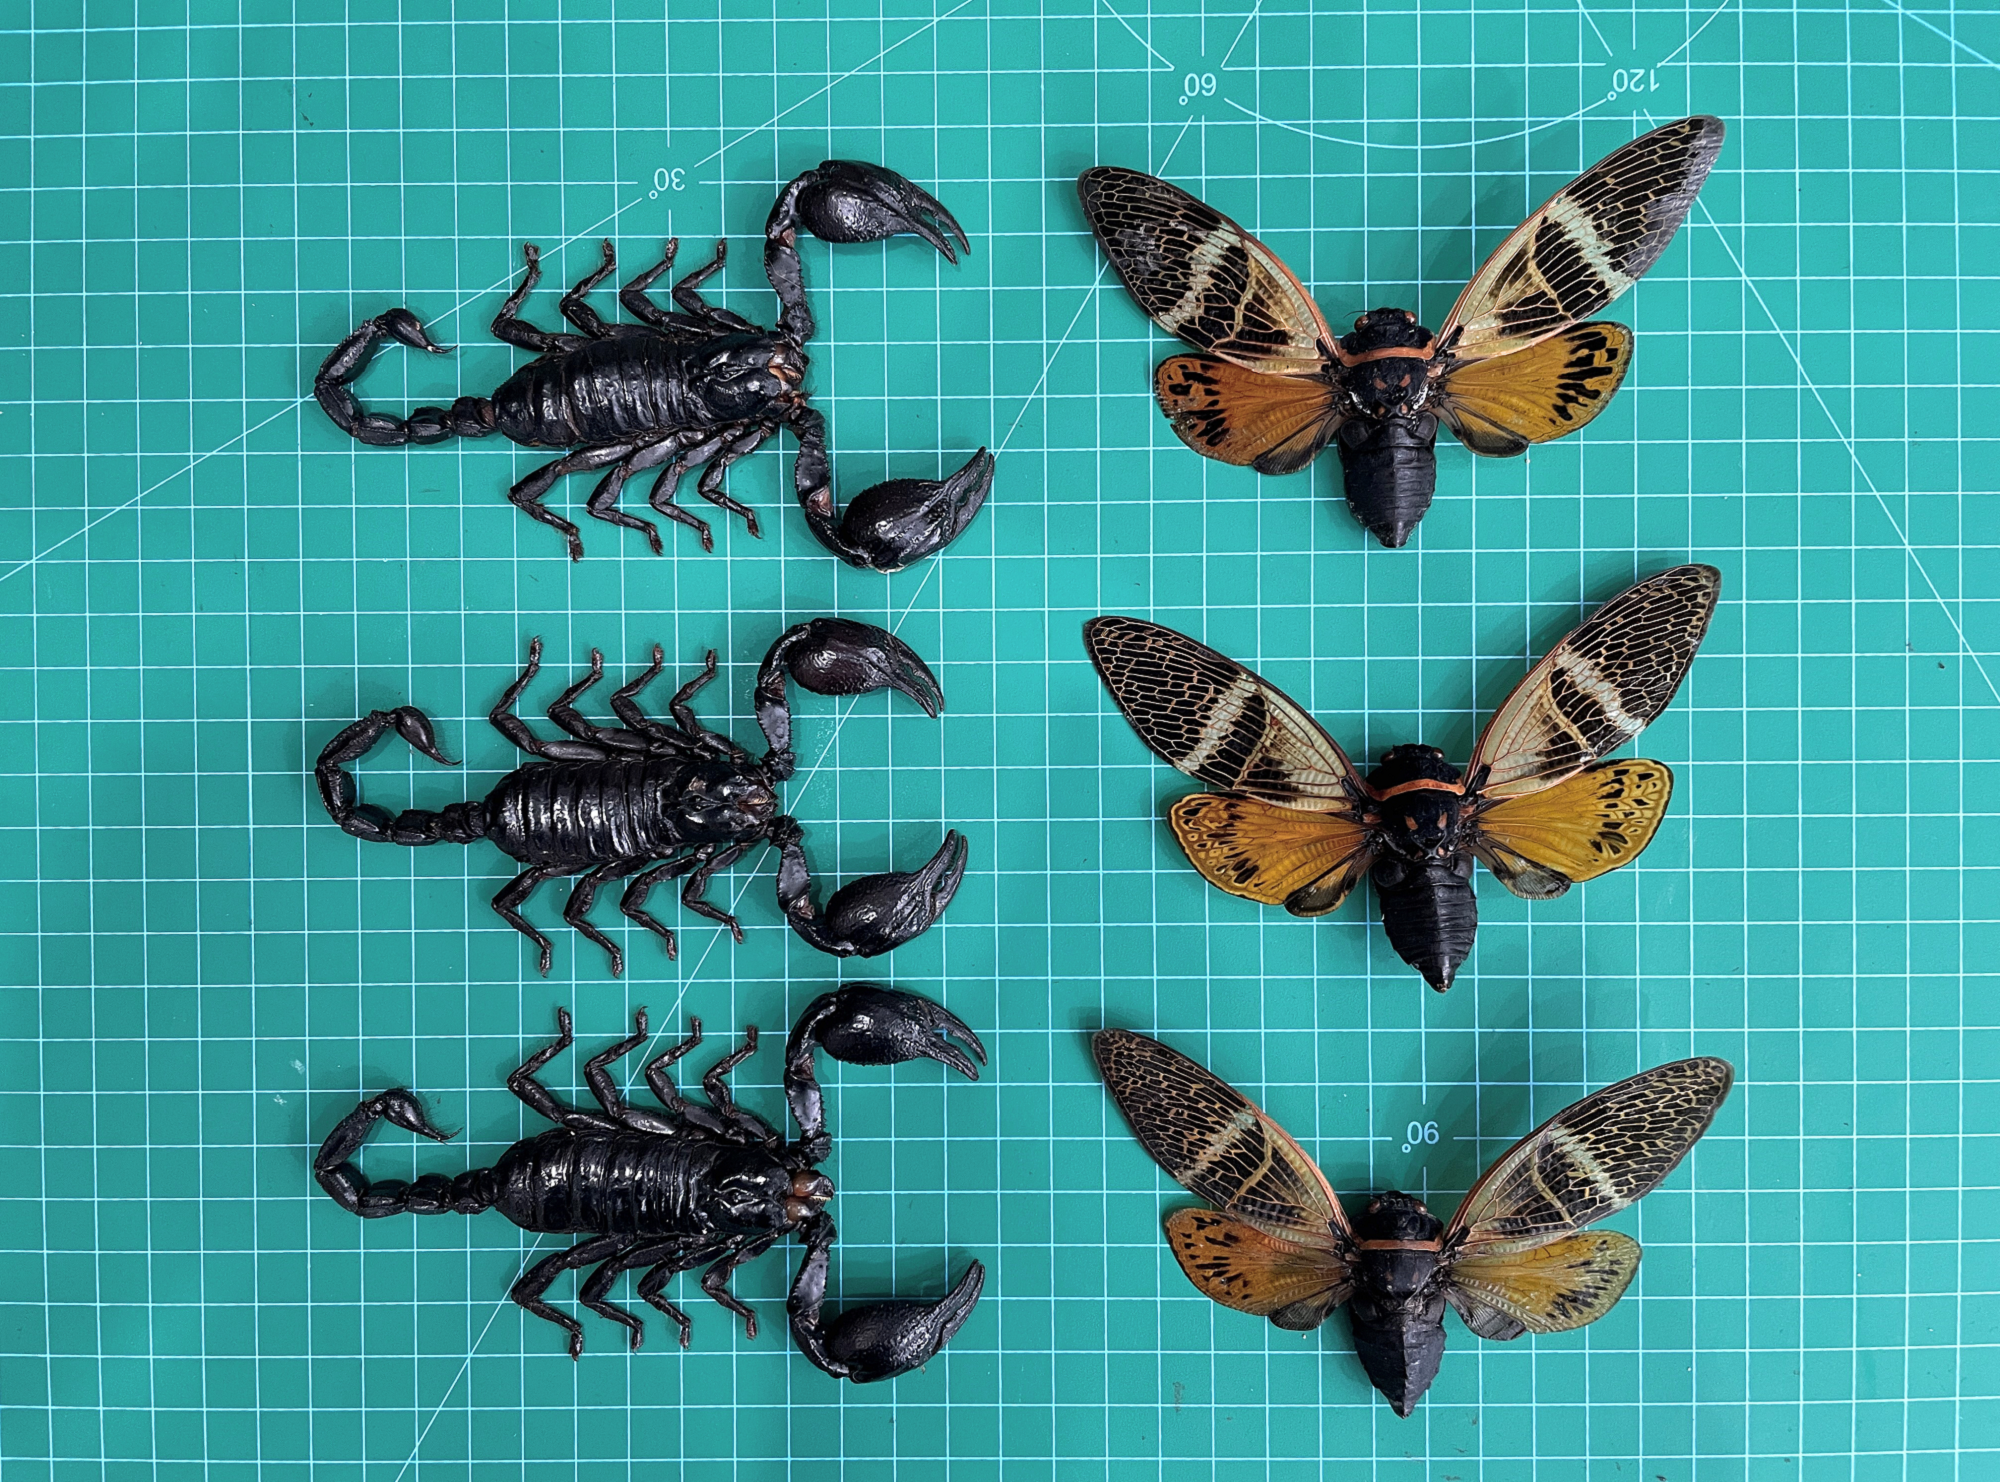 6 Real Cicada Scorpion Specimens Collection Bug Mounted Dead Animal Preserved Entomology Taxidermy Oddity Scientific Lover Insect Nature Office Desk Art Artwork Display UM-09